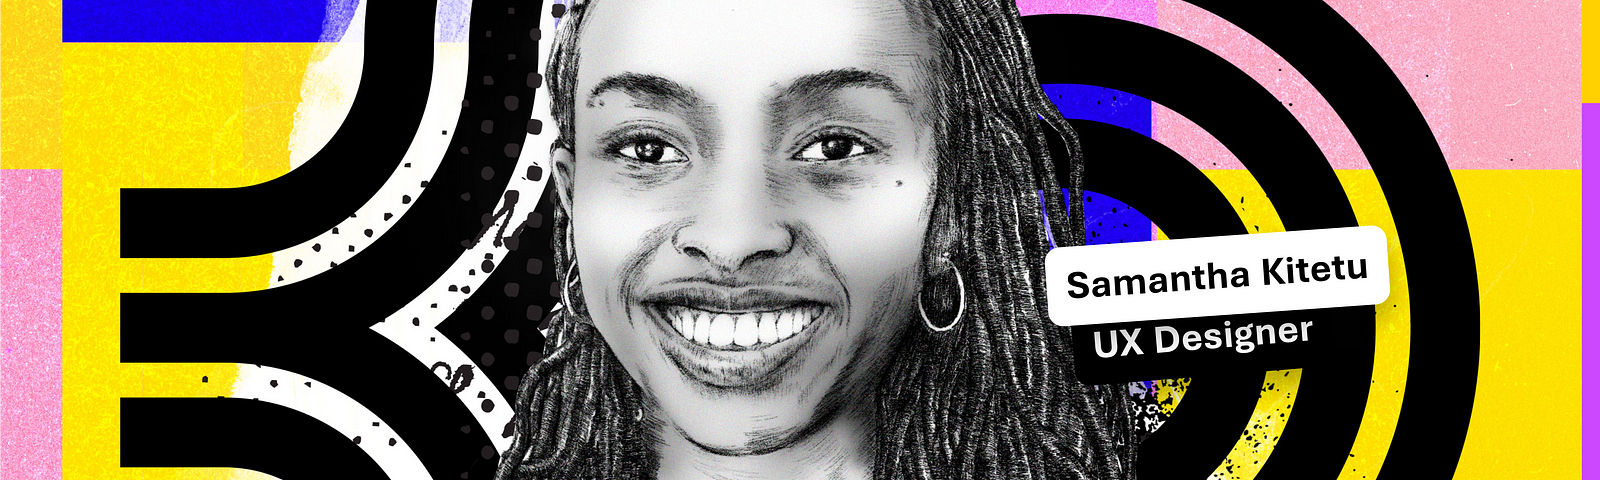 A pencil sketch of a woman with a braided hairstyle smiling with earrings on against an abstract colorful background.